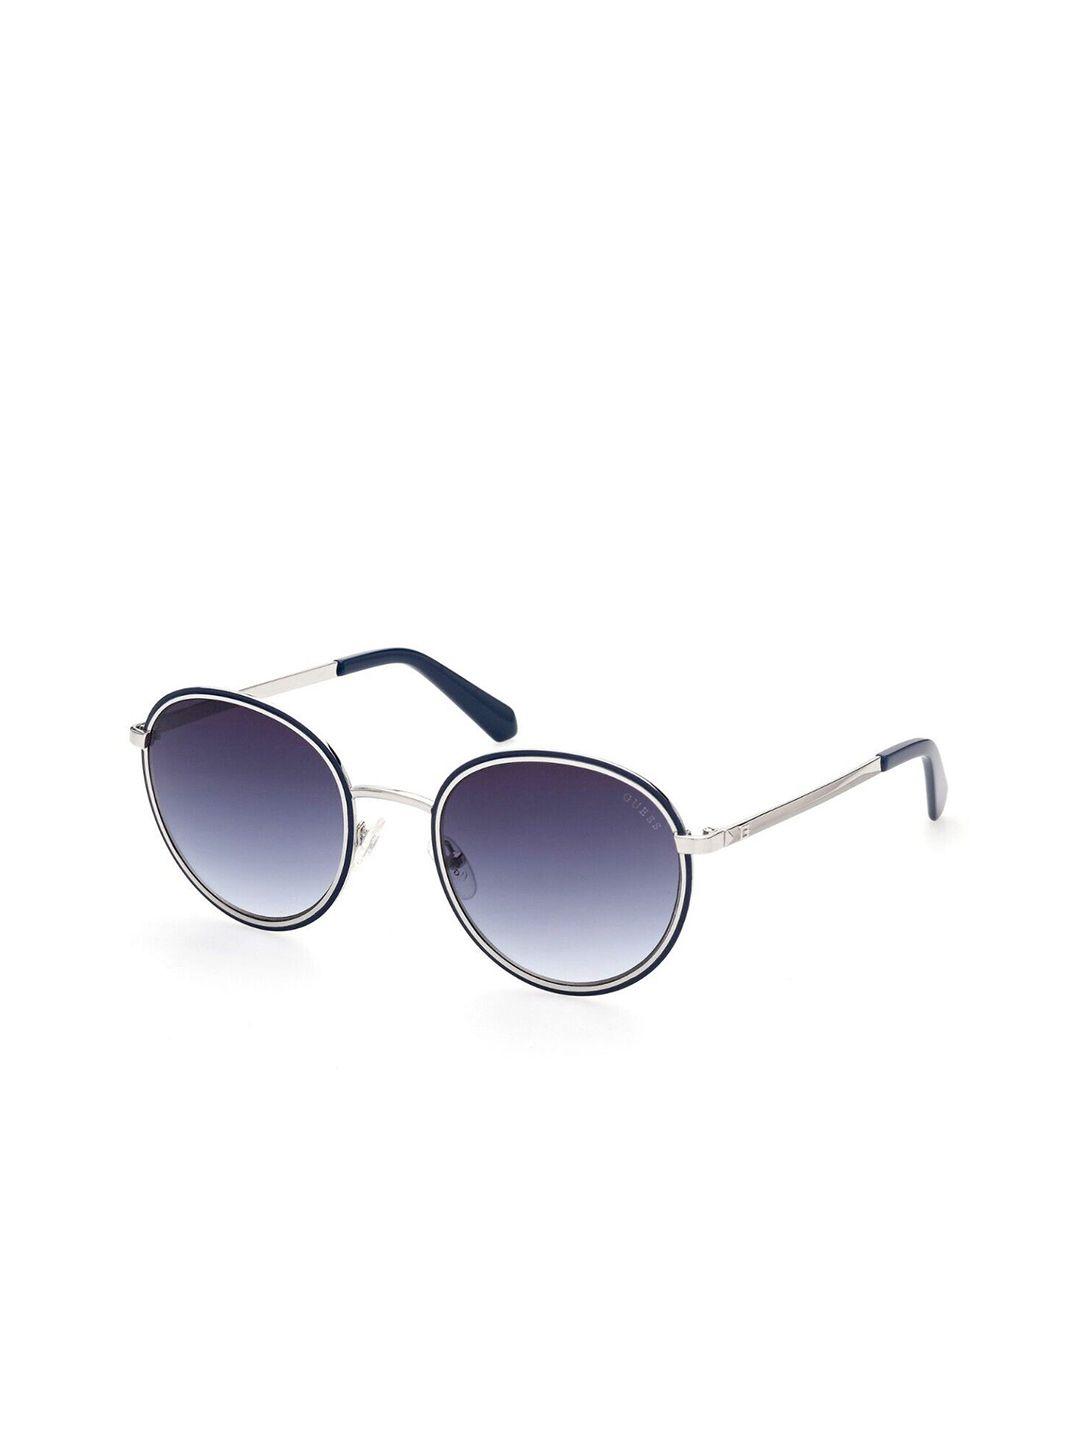 GUESS Round Sunglasses with UV Protected Lens